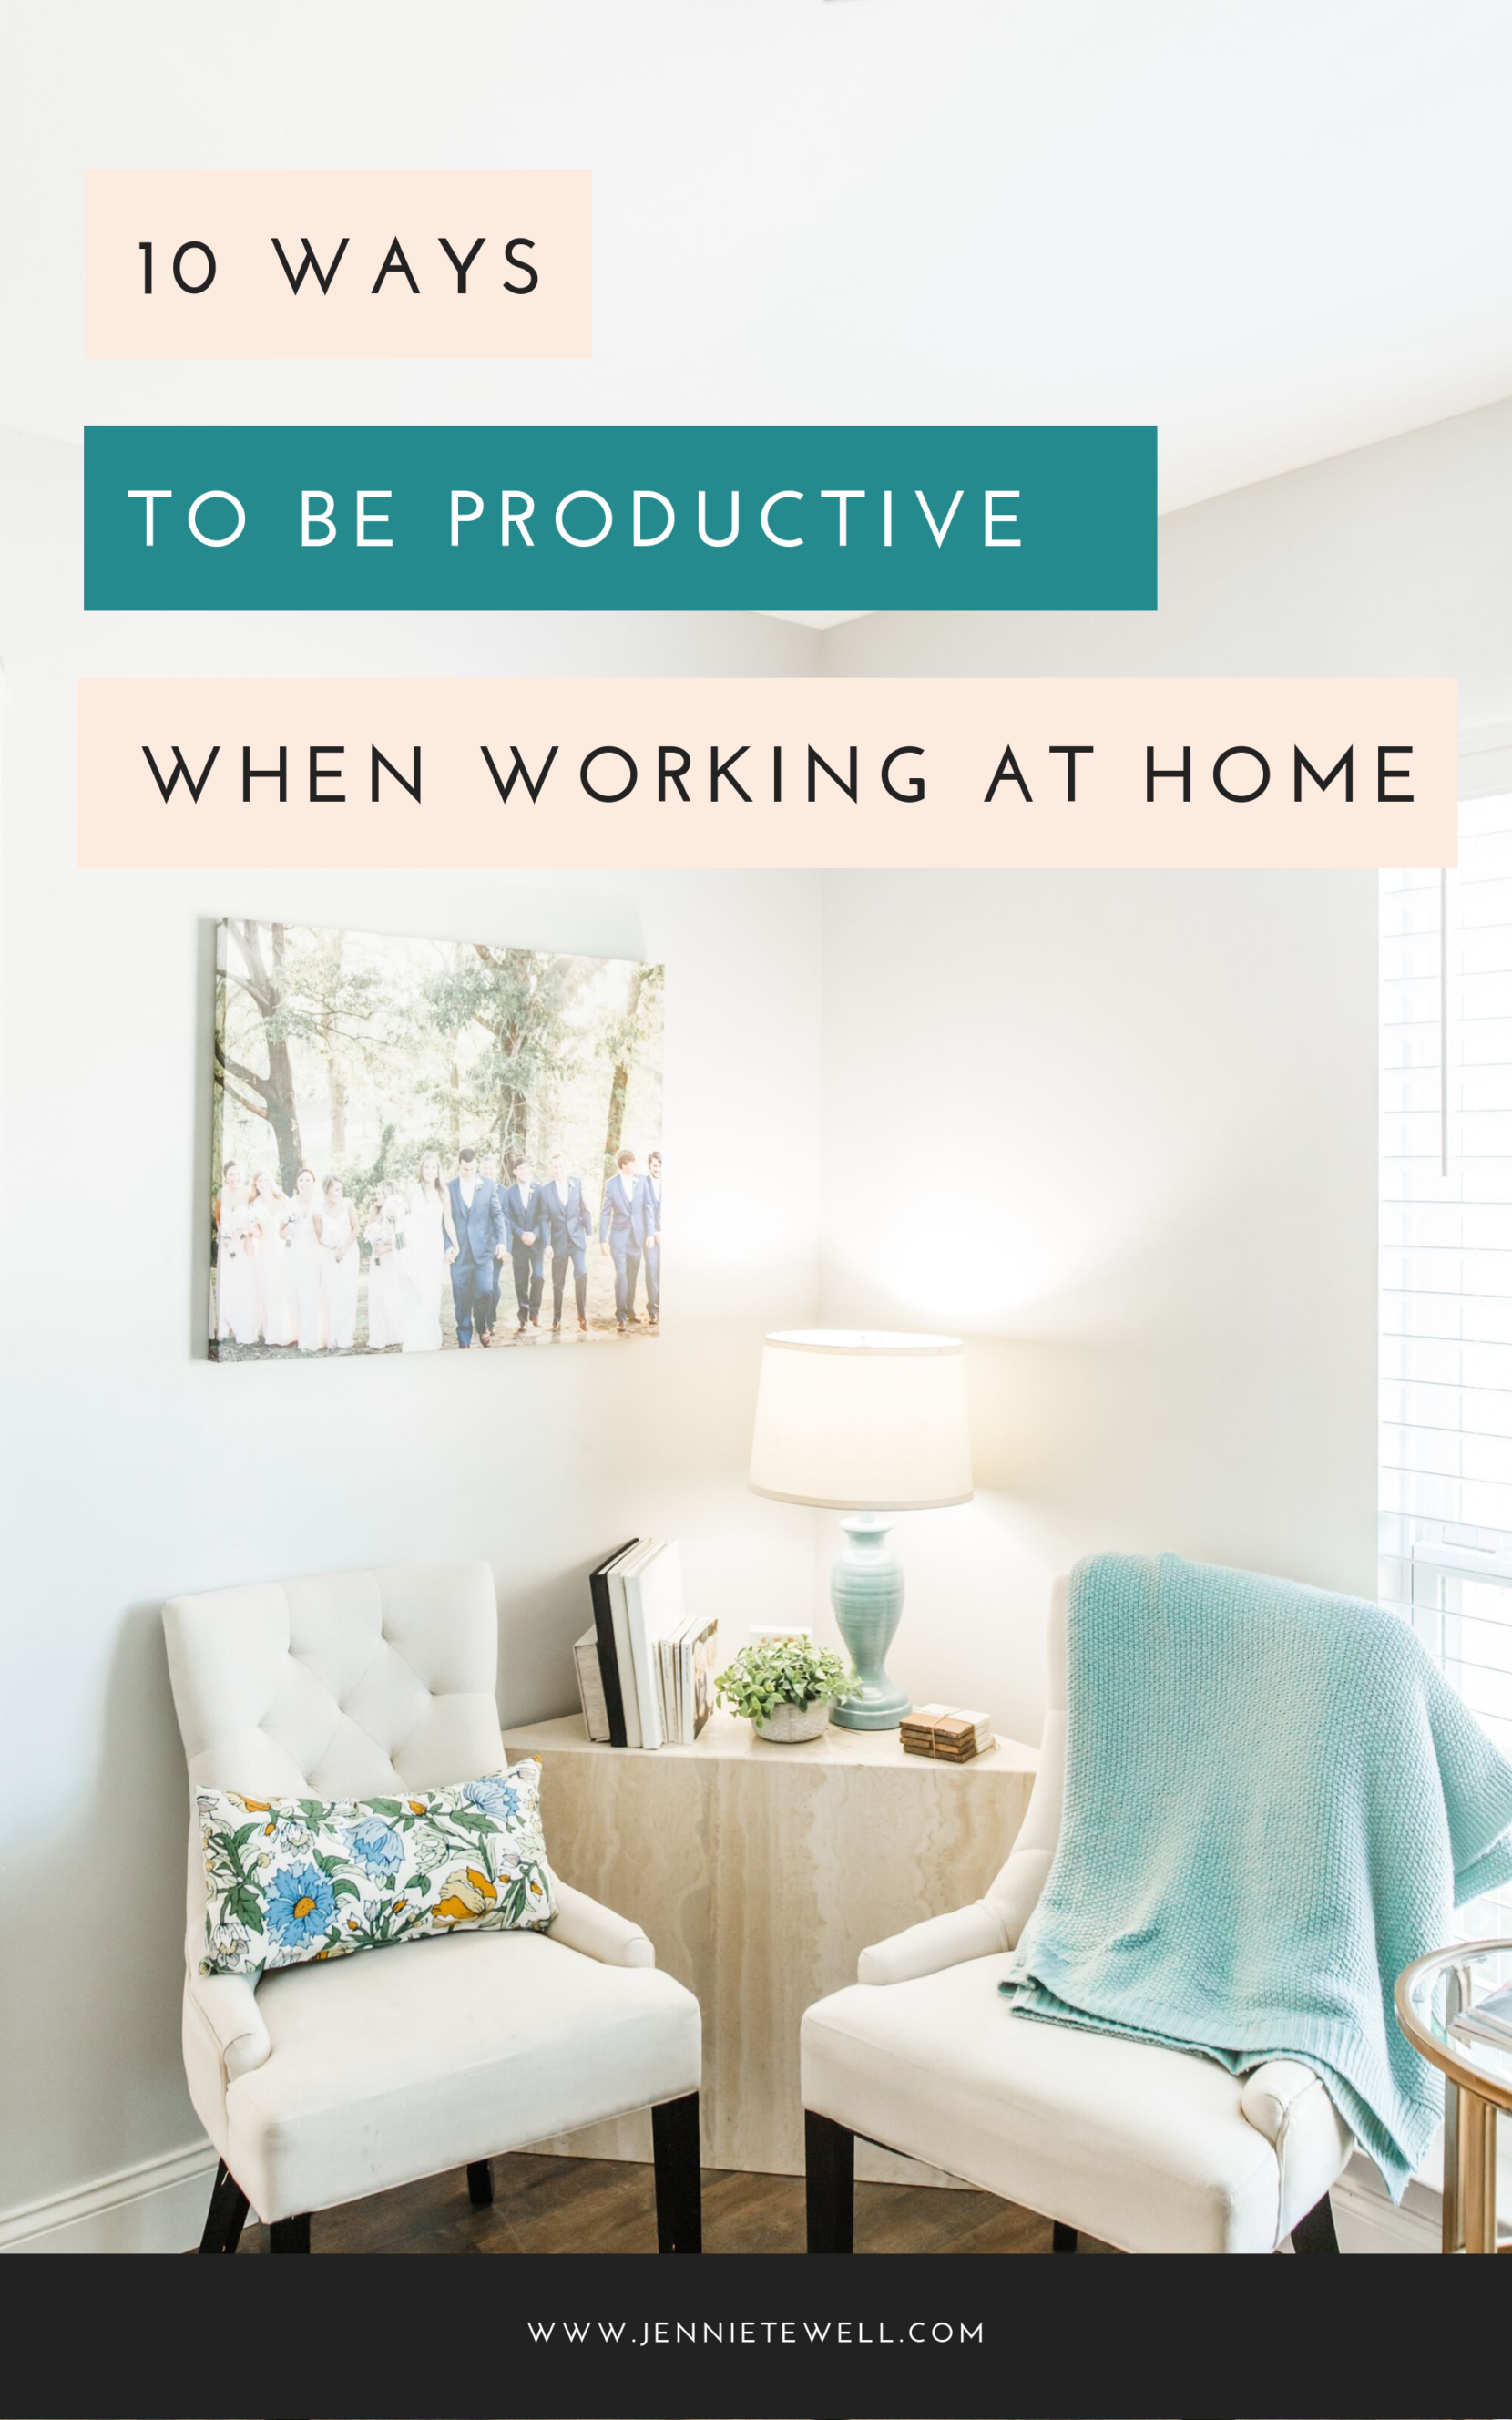 10 ways to be productive when working at home